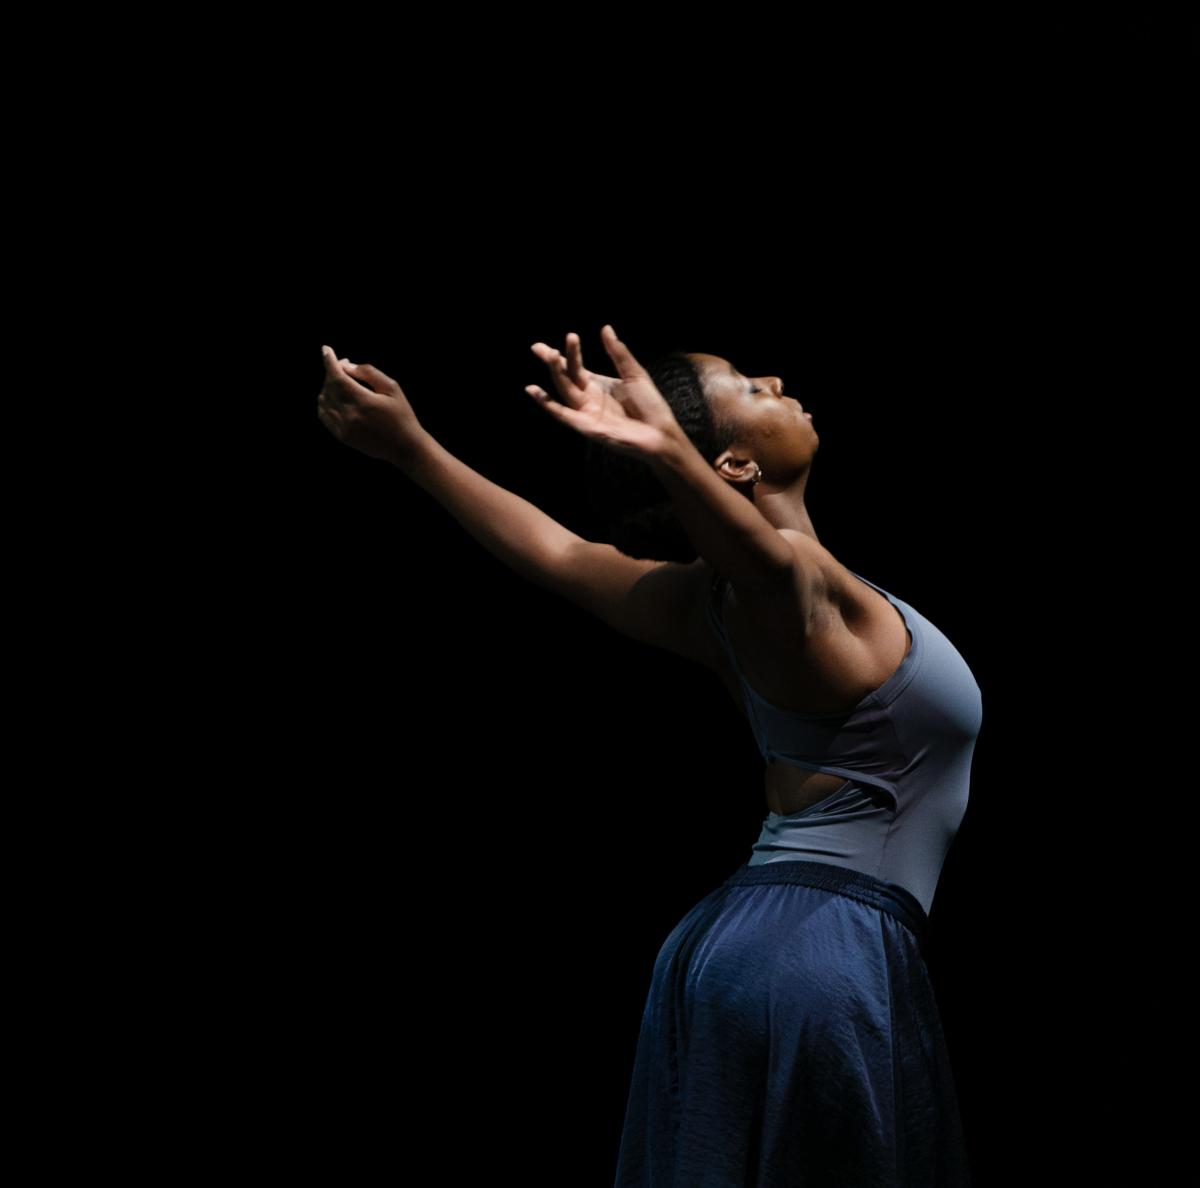 Dancer in blue, in motion at right side of image, back arched, arms outstretched up and behind, 